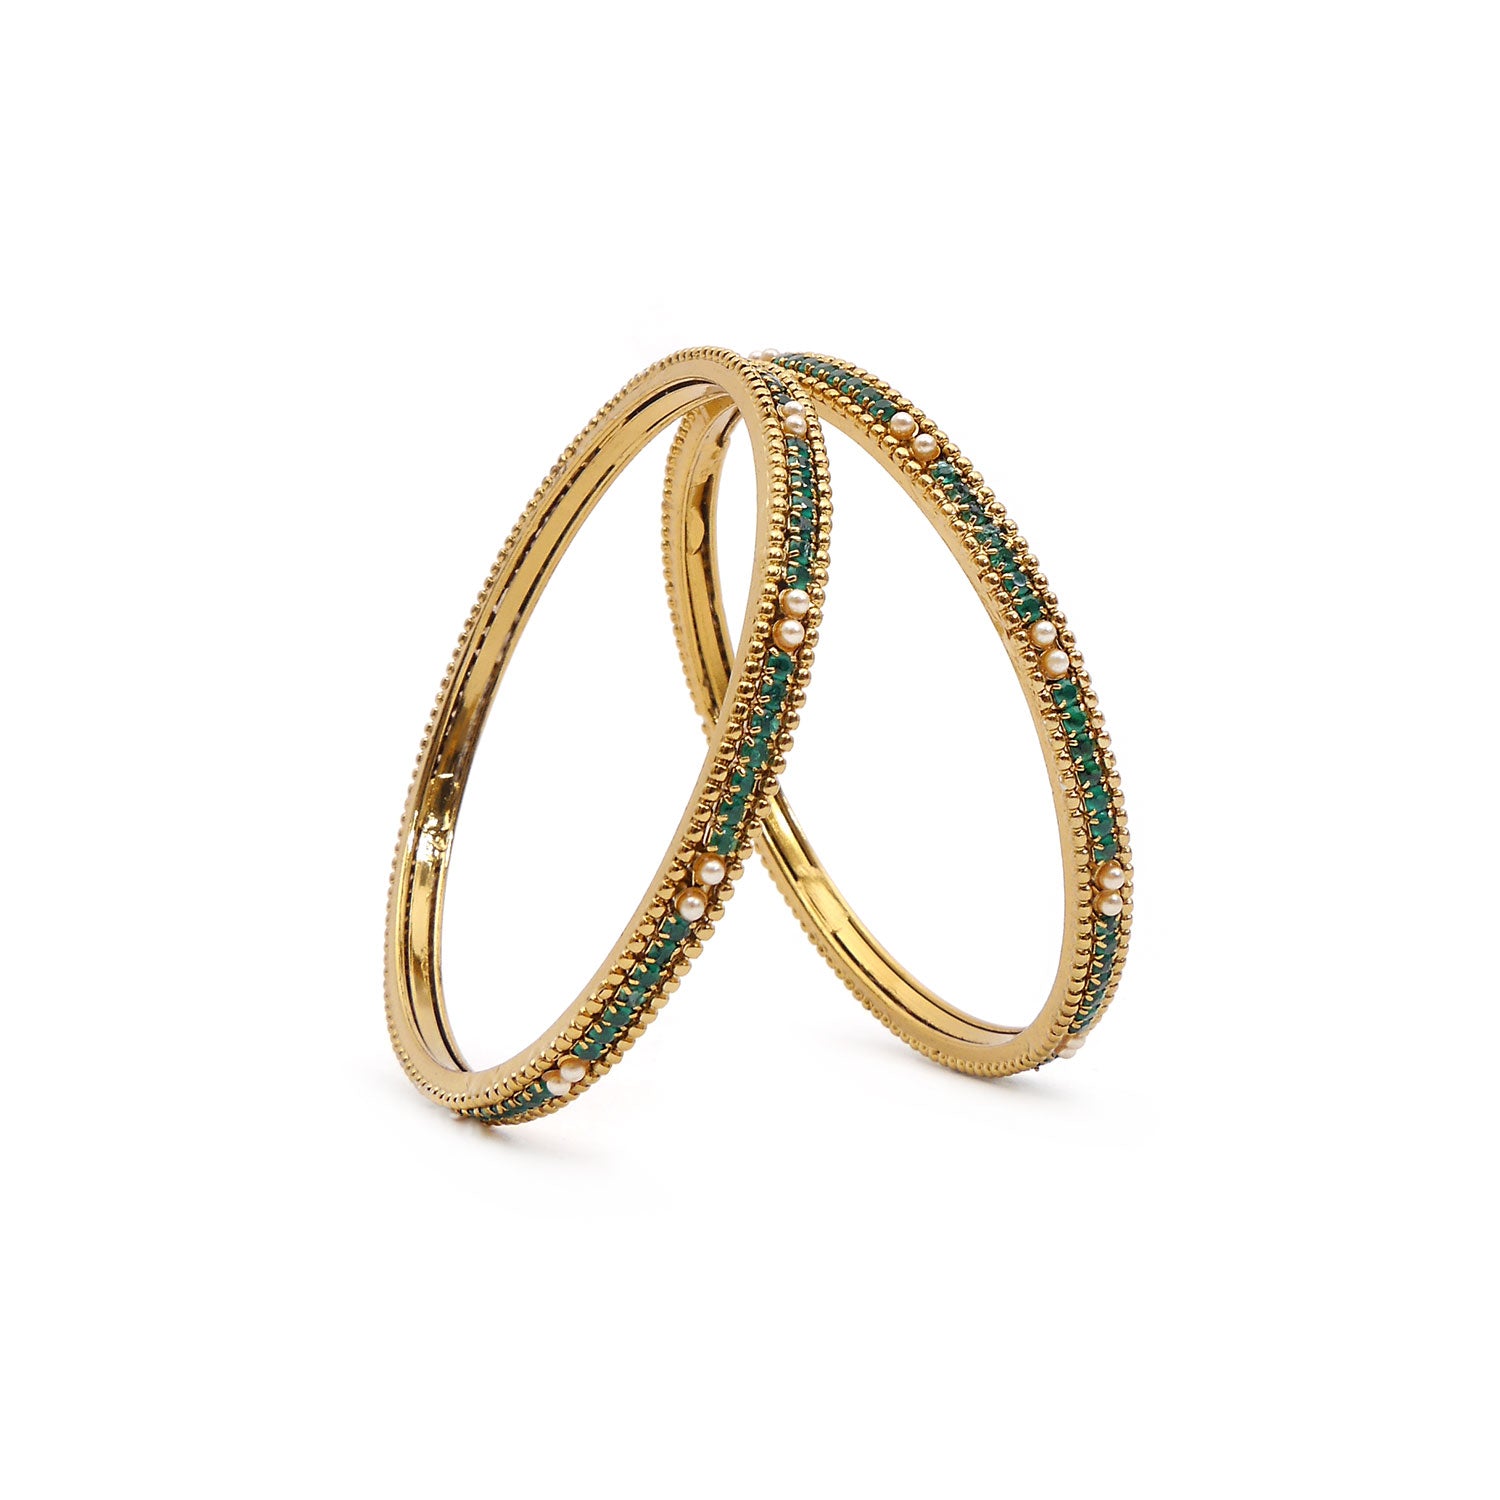 Emerald and Pearl Antique Bangles